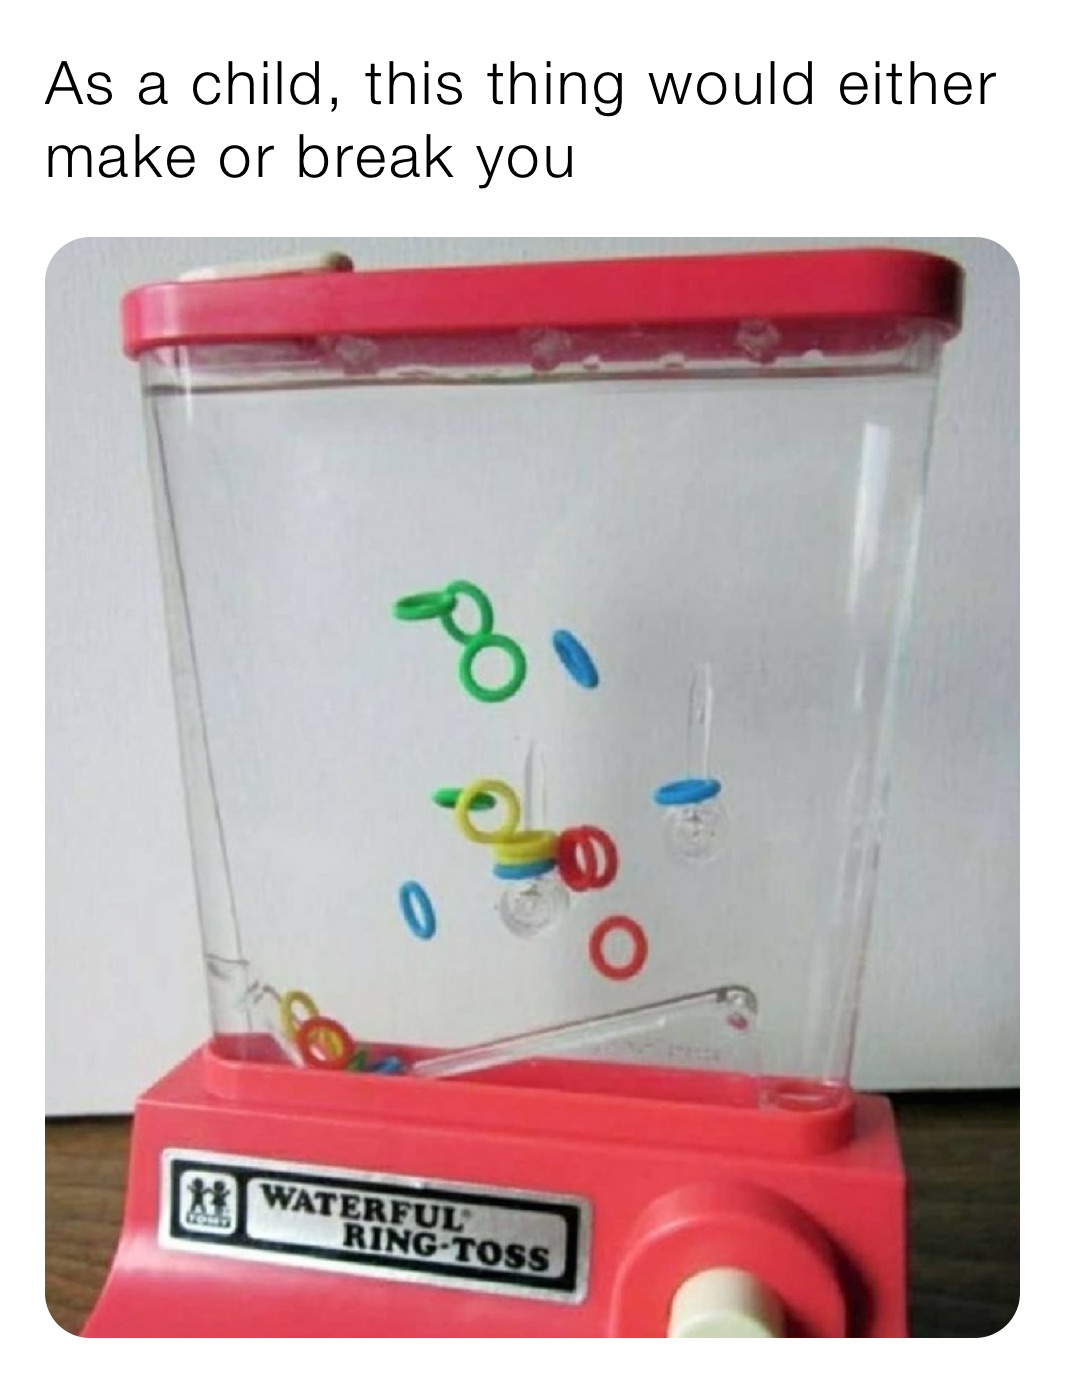 As a child, this thing would either make or break you